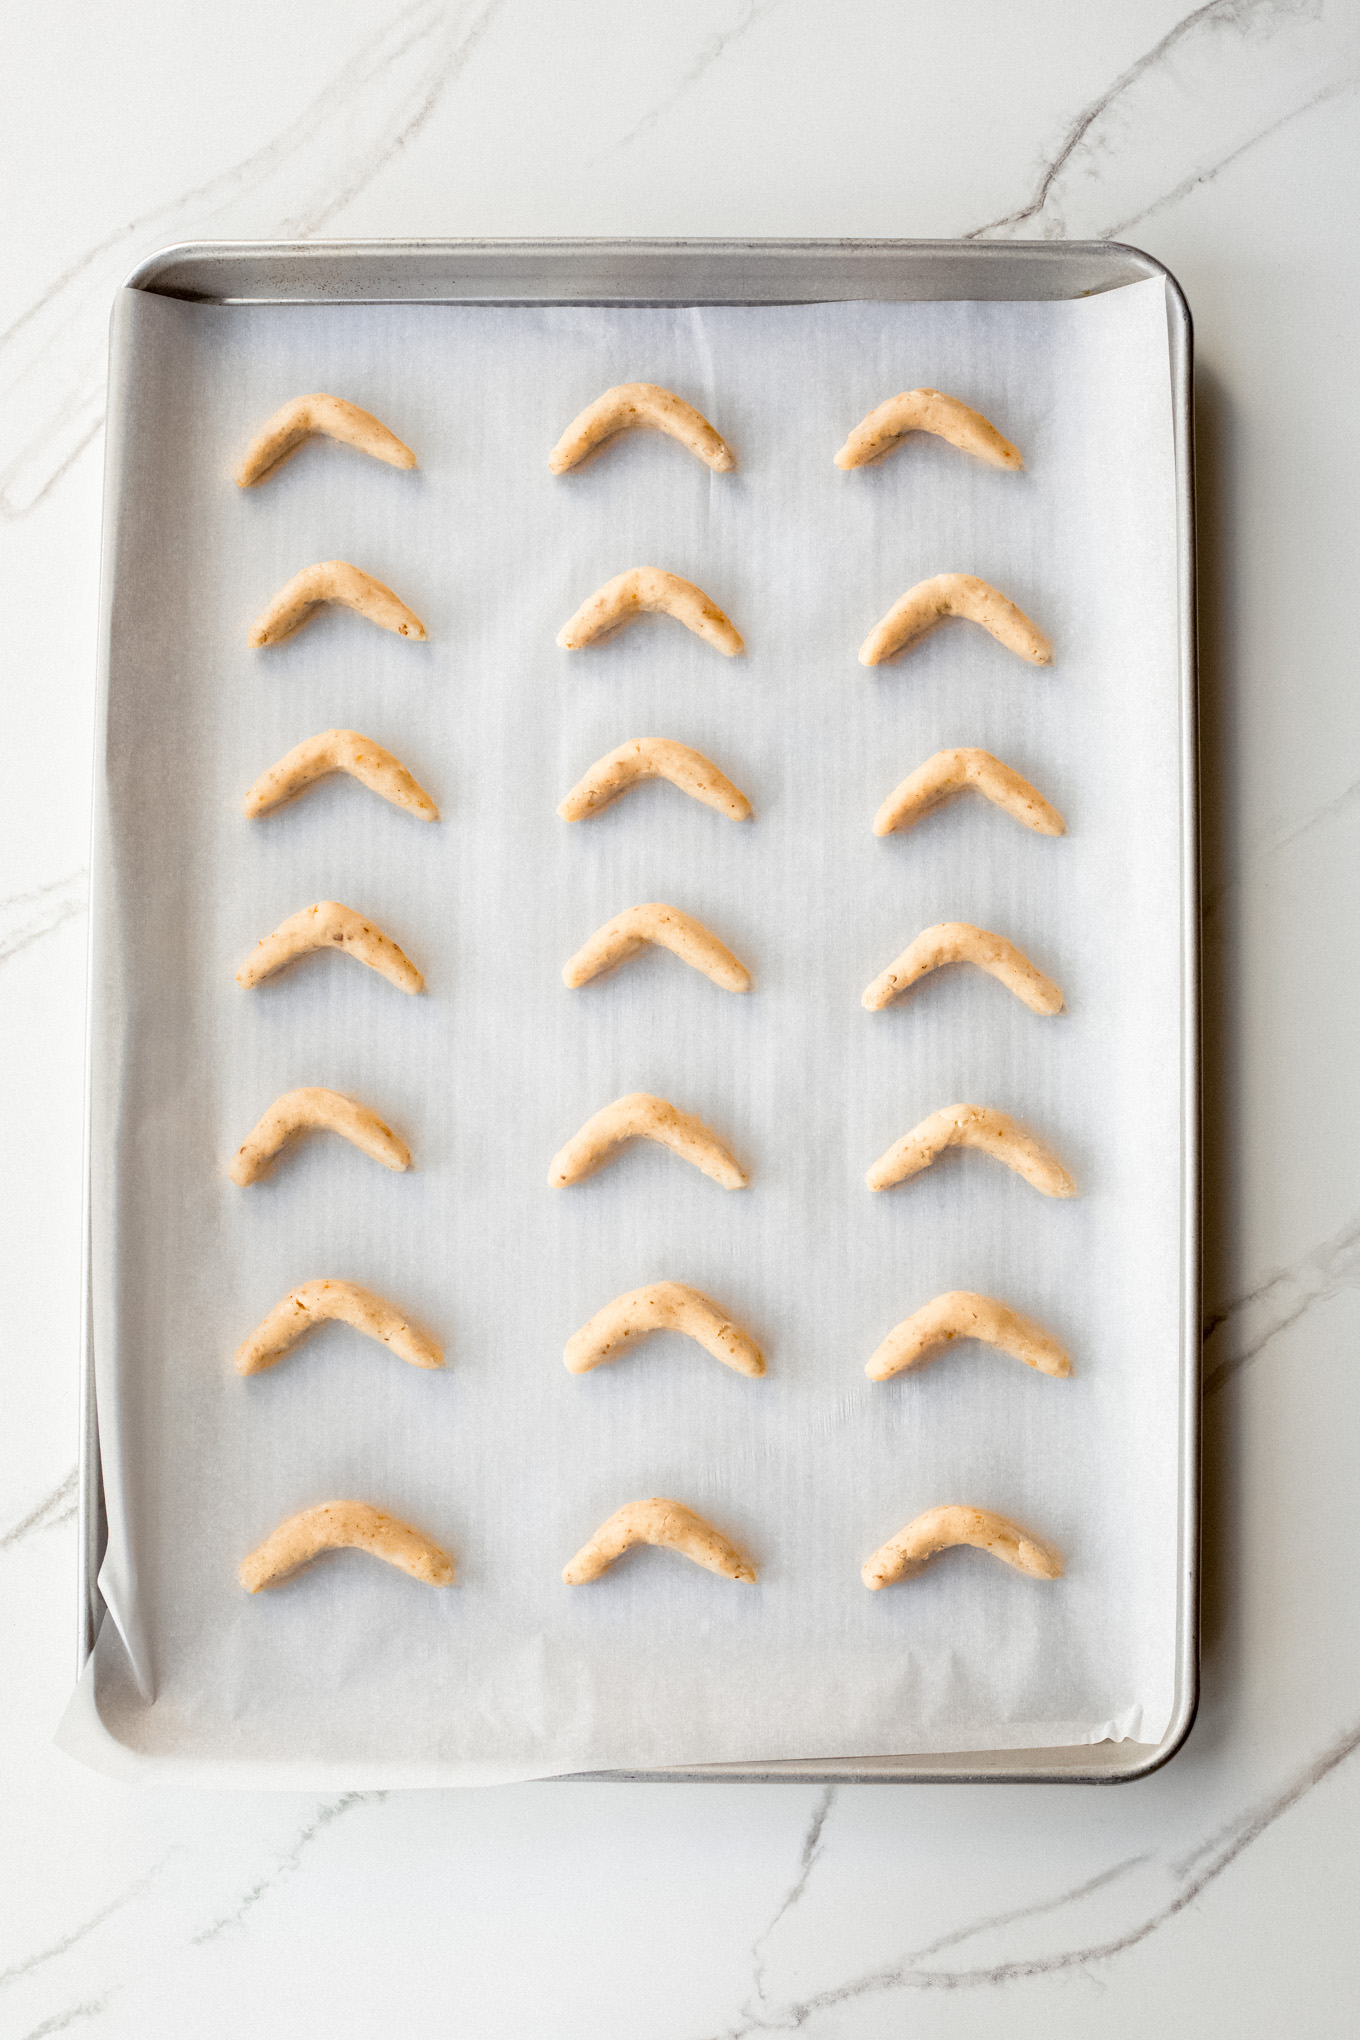 dough formed into crescents on a baking sheet.